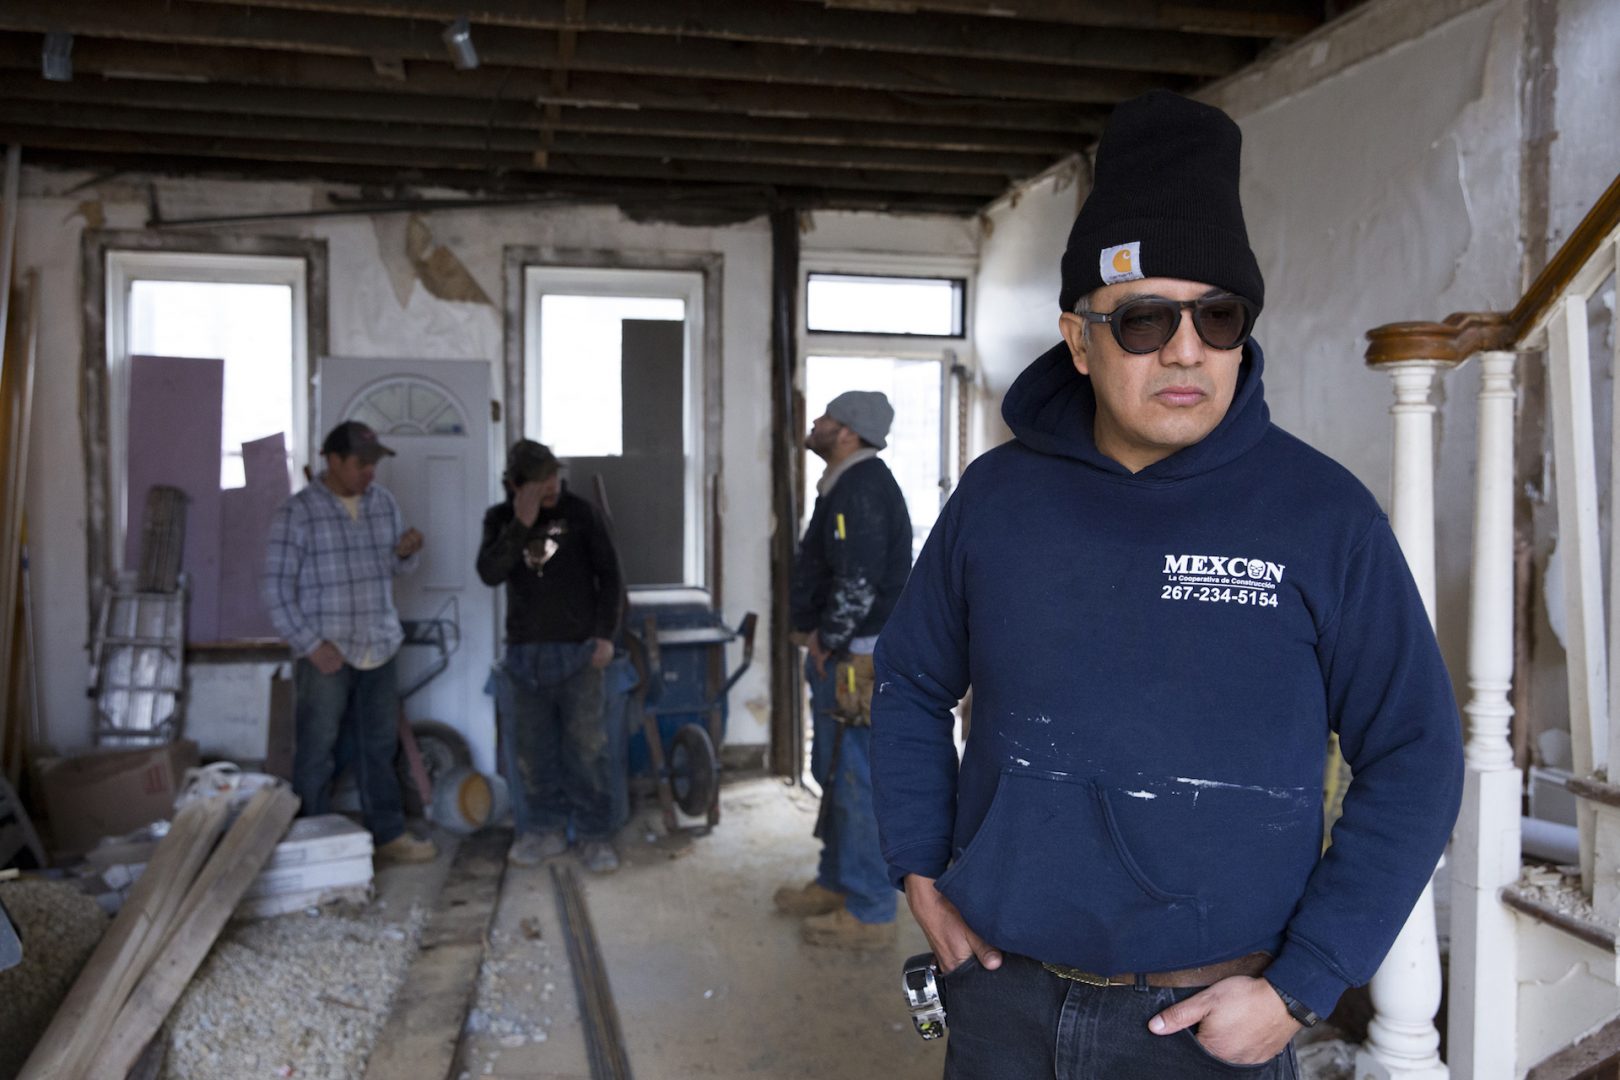 Javier Garcia-Hernandez, founder of Philadelphia construction cooperative MexCon, inspects a job site on January 10, 2020.